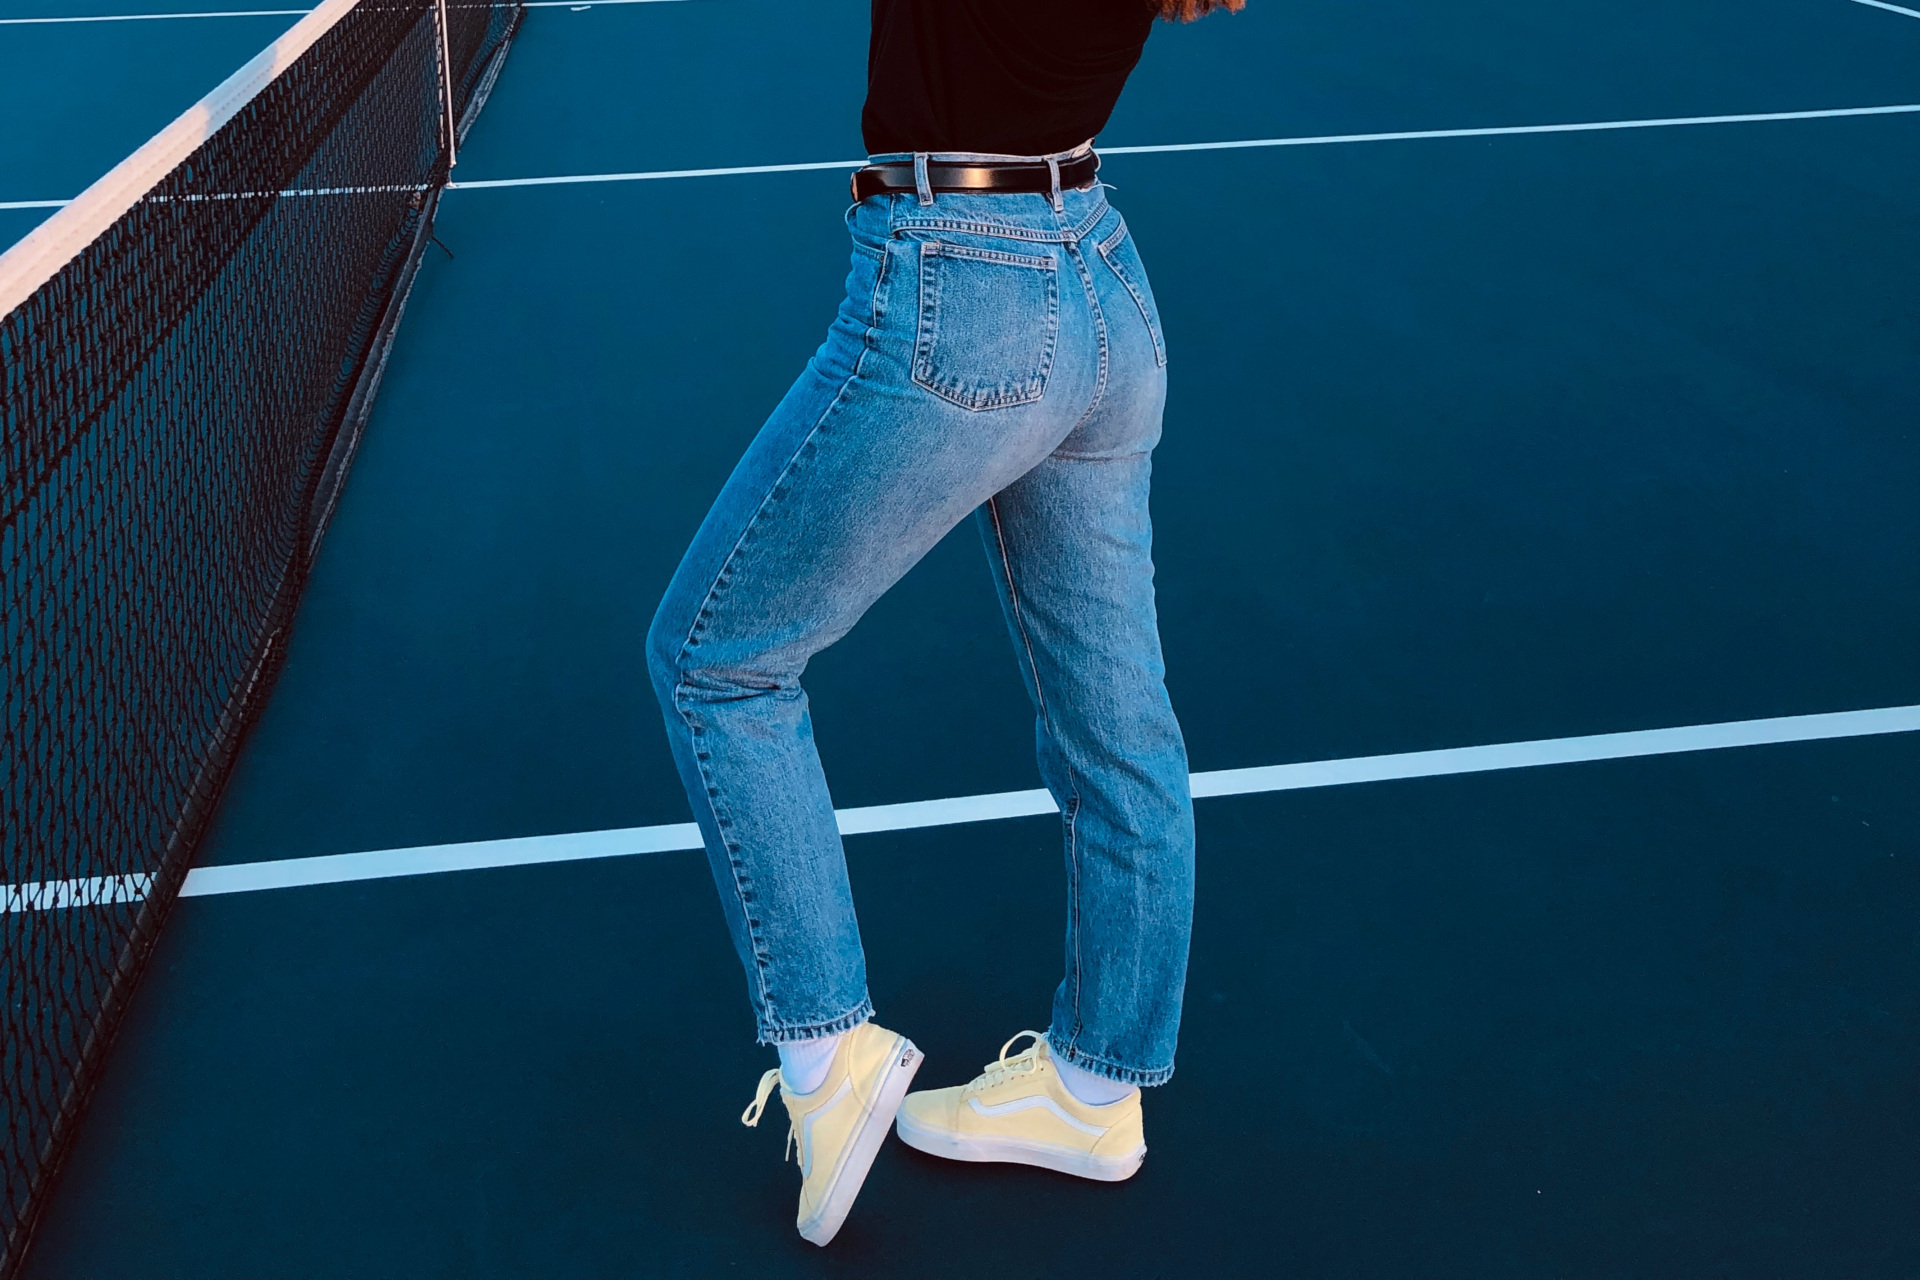 Close up of lower half in blue jeans on tennis court